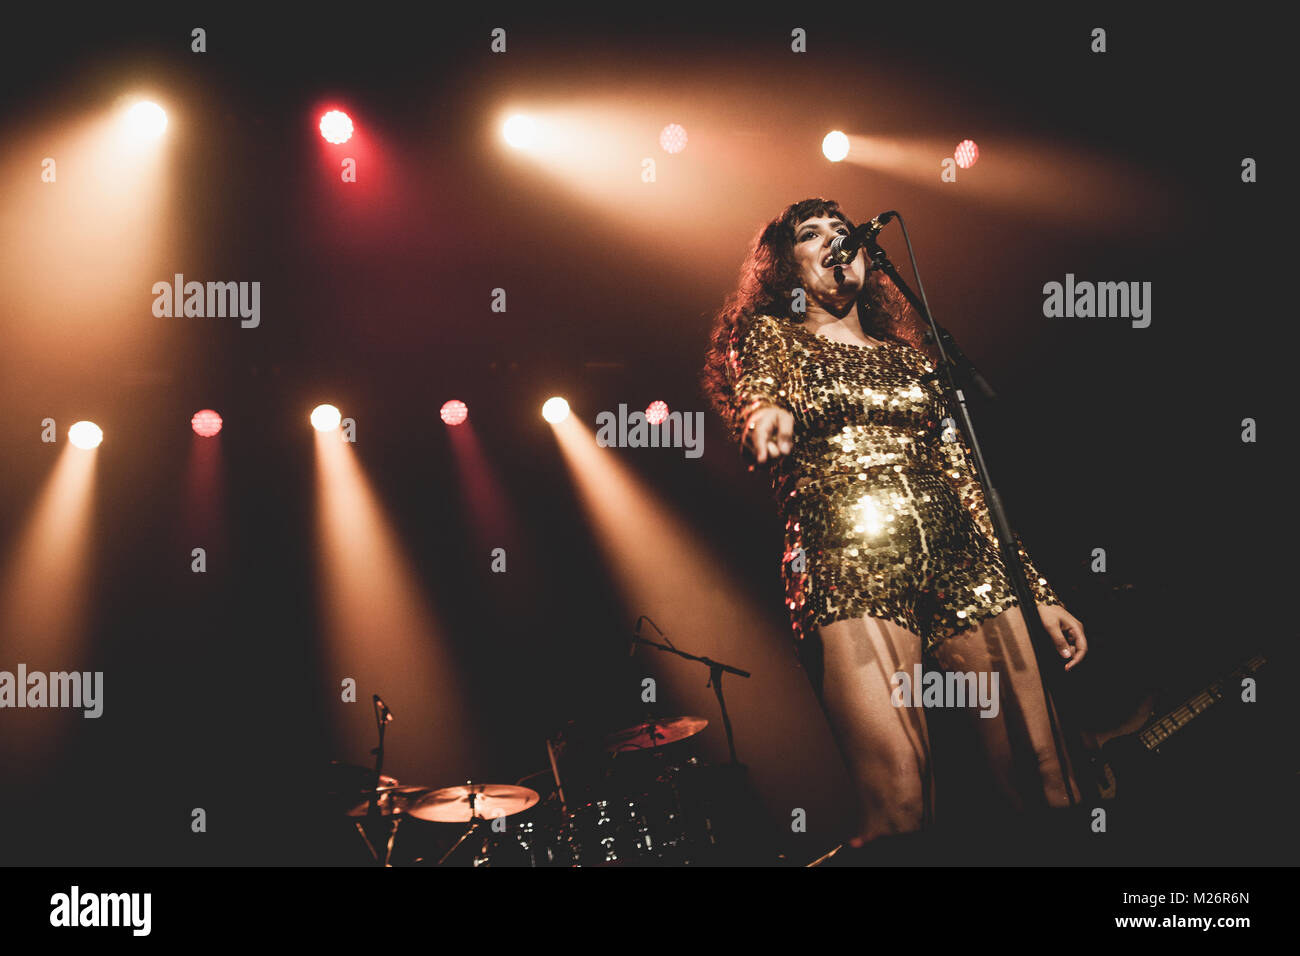 Soul singer and diva Coco from the Danish band Quadron is here pictured singing live on at Vega in Copenhagen. Denmark 2013 Stock Photo -